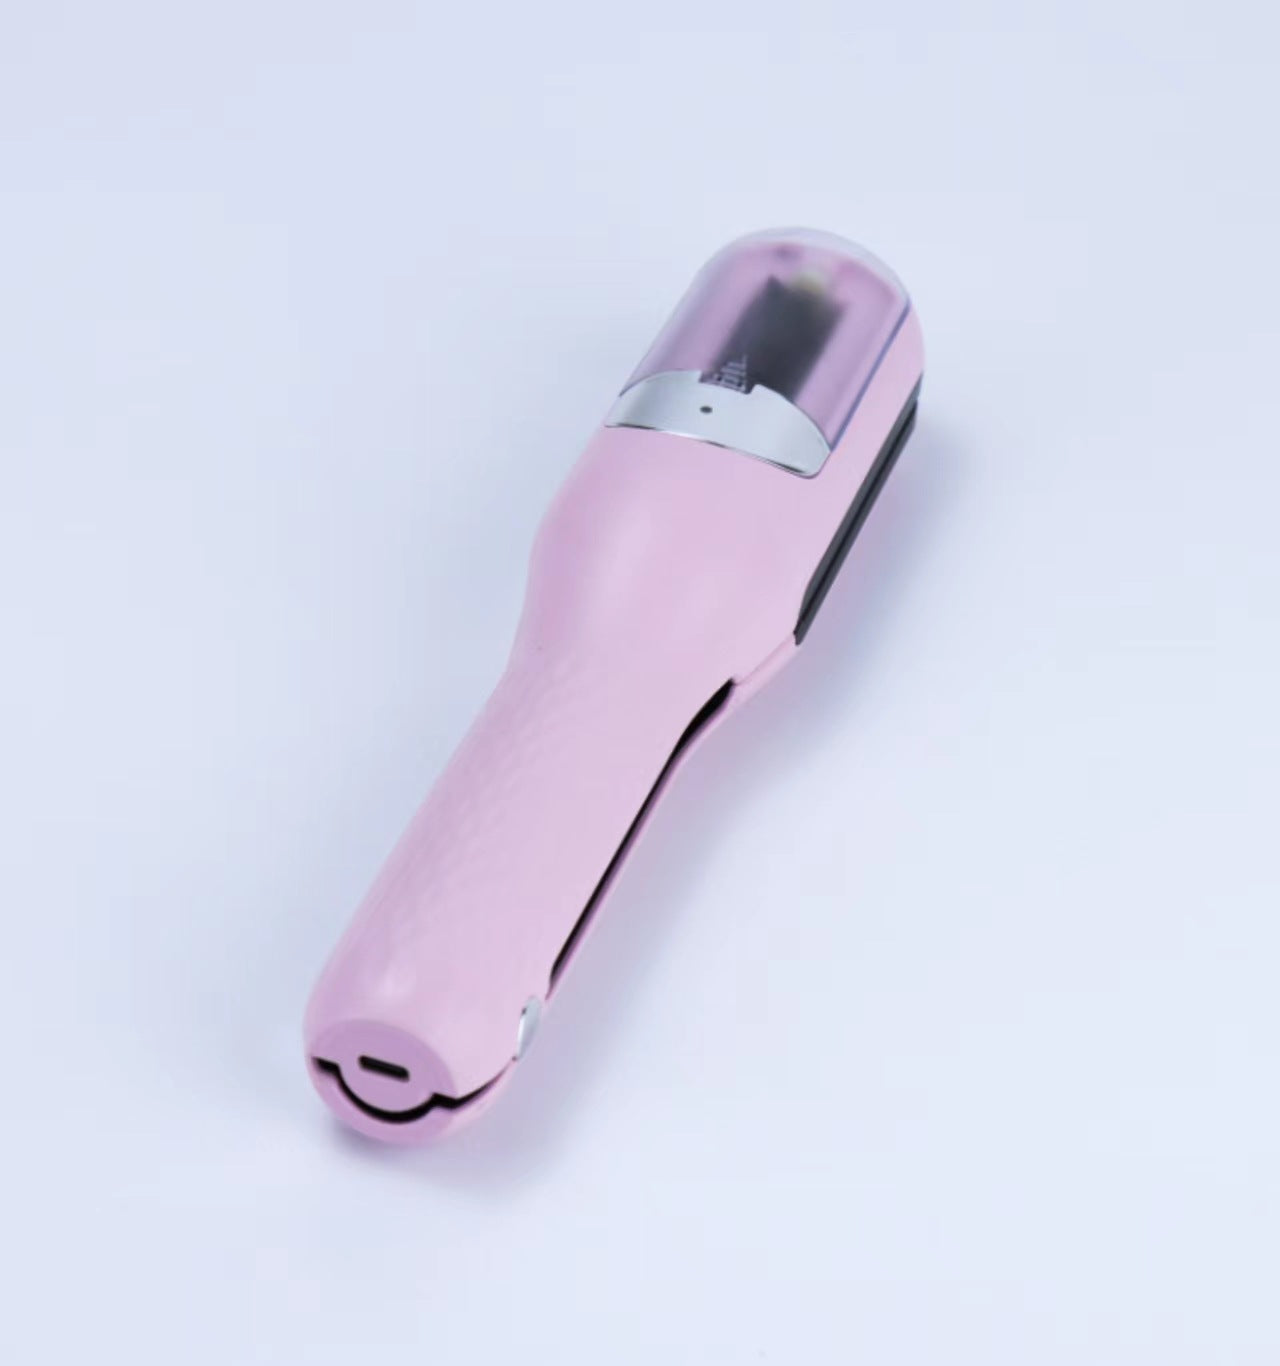 Rechargeable 2 In 1 Trimmer Hair Curler - SELFTRITSS